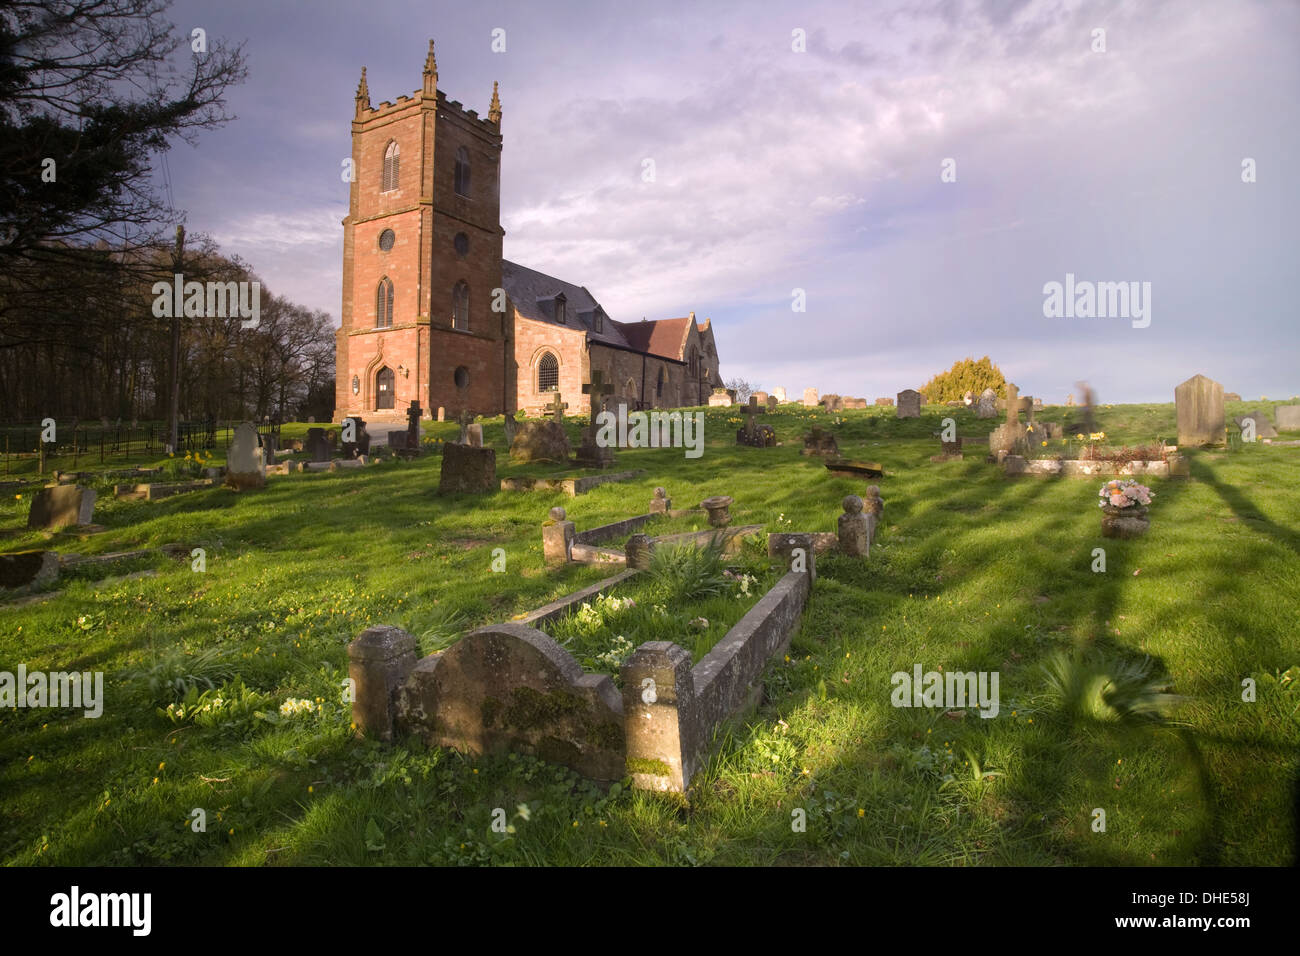 St Mary the Virgin Church Hanbury. The low sun at sunset casts long shadows on the graves in the graveyard. Stock Photo